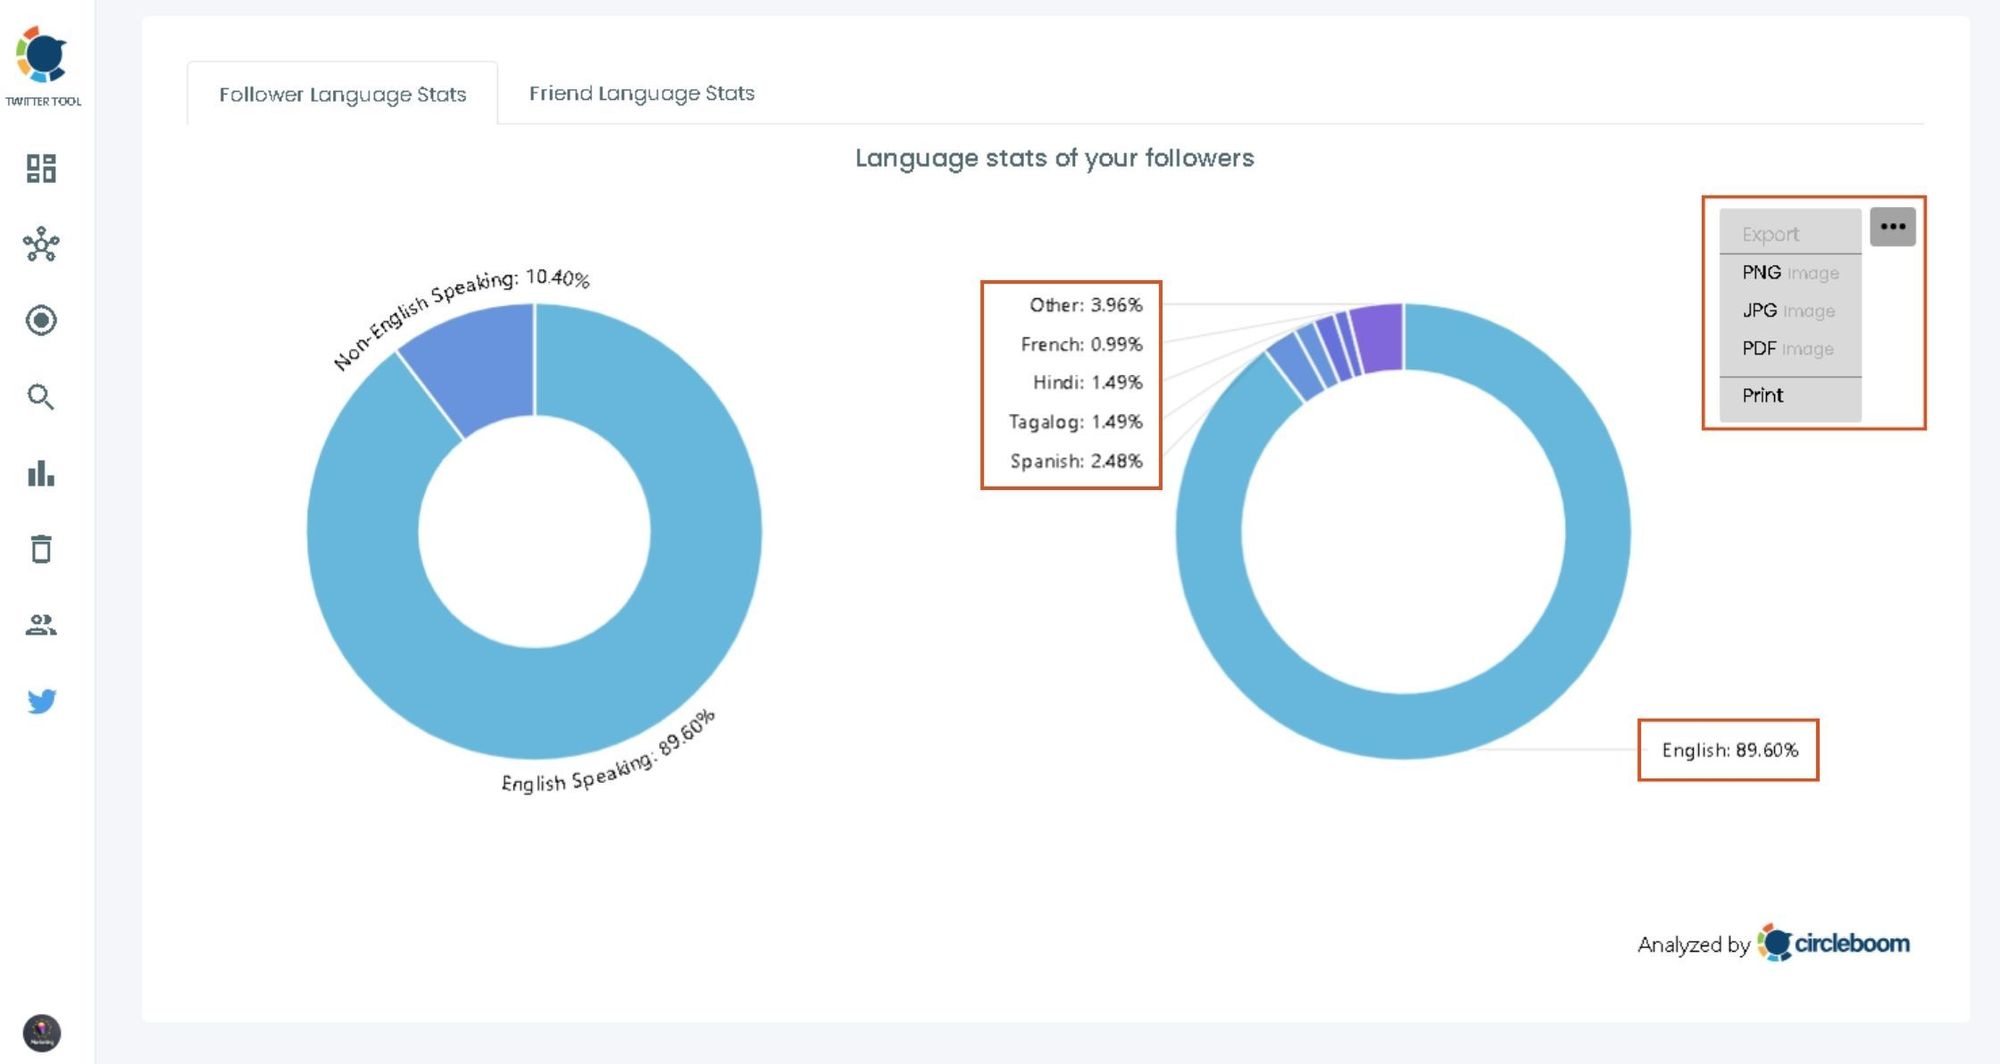 Circleboom's Twitter follower analyzer gives you the language stats of your followers.